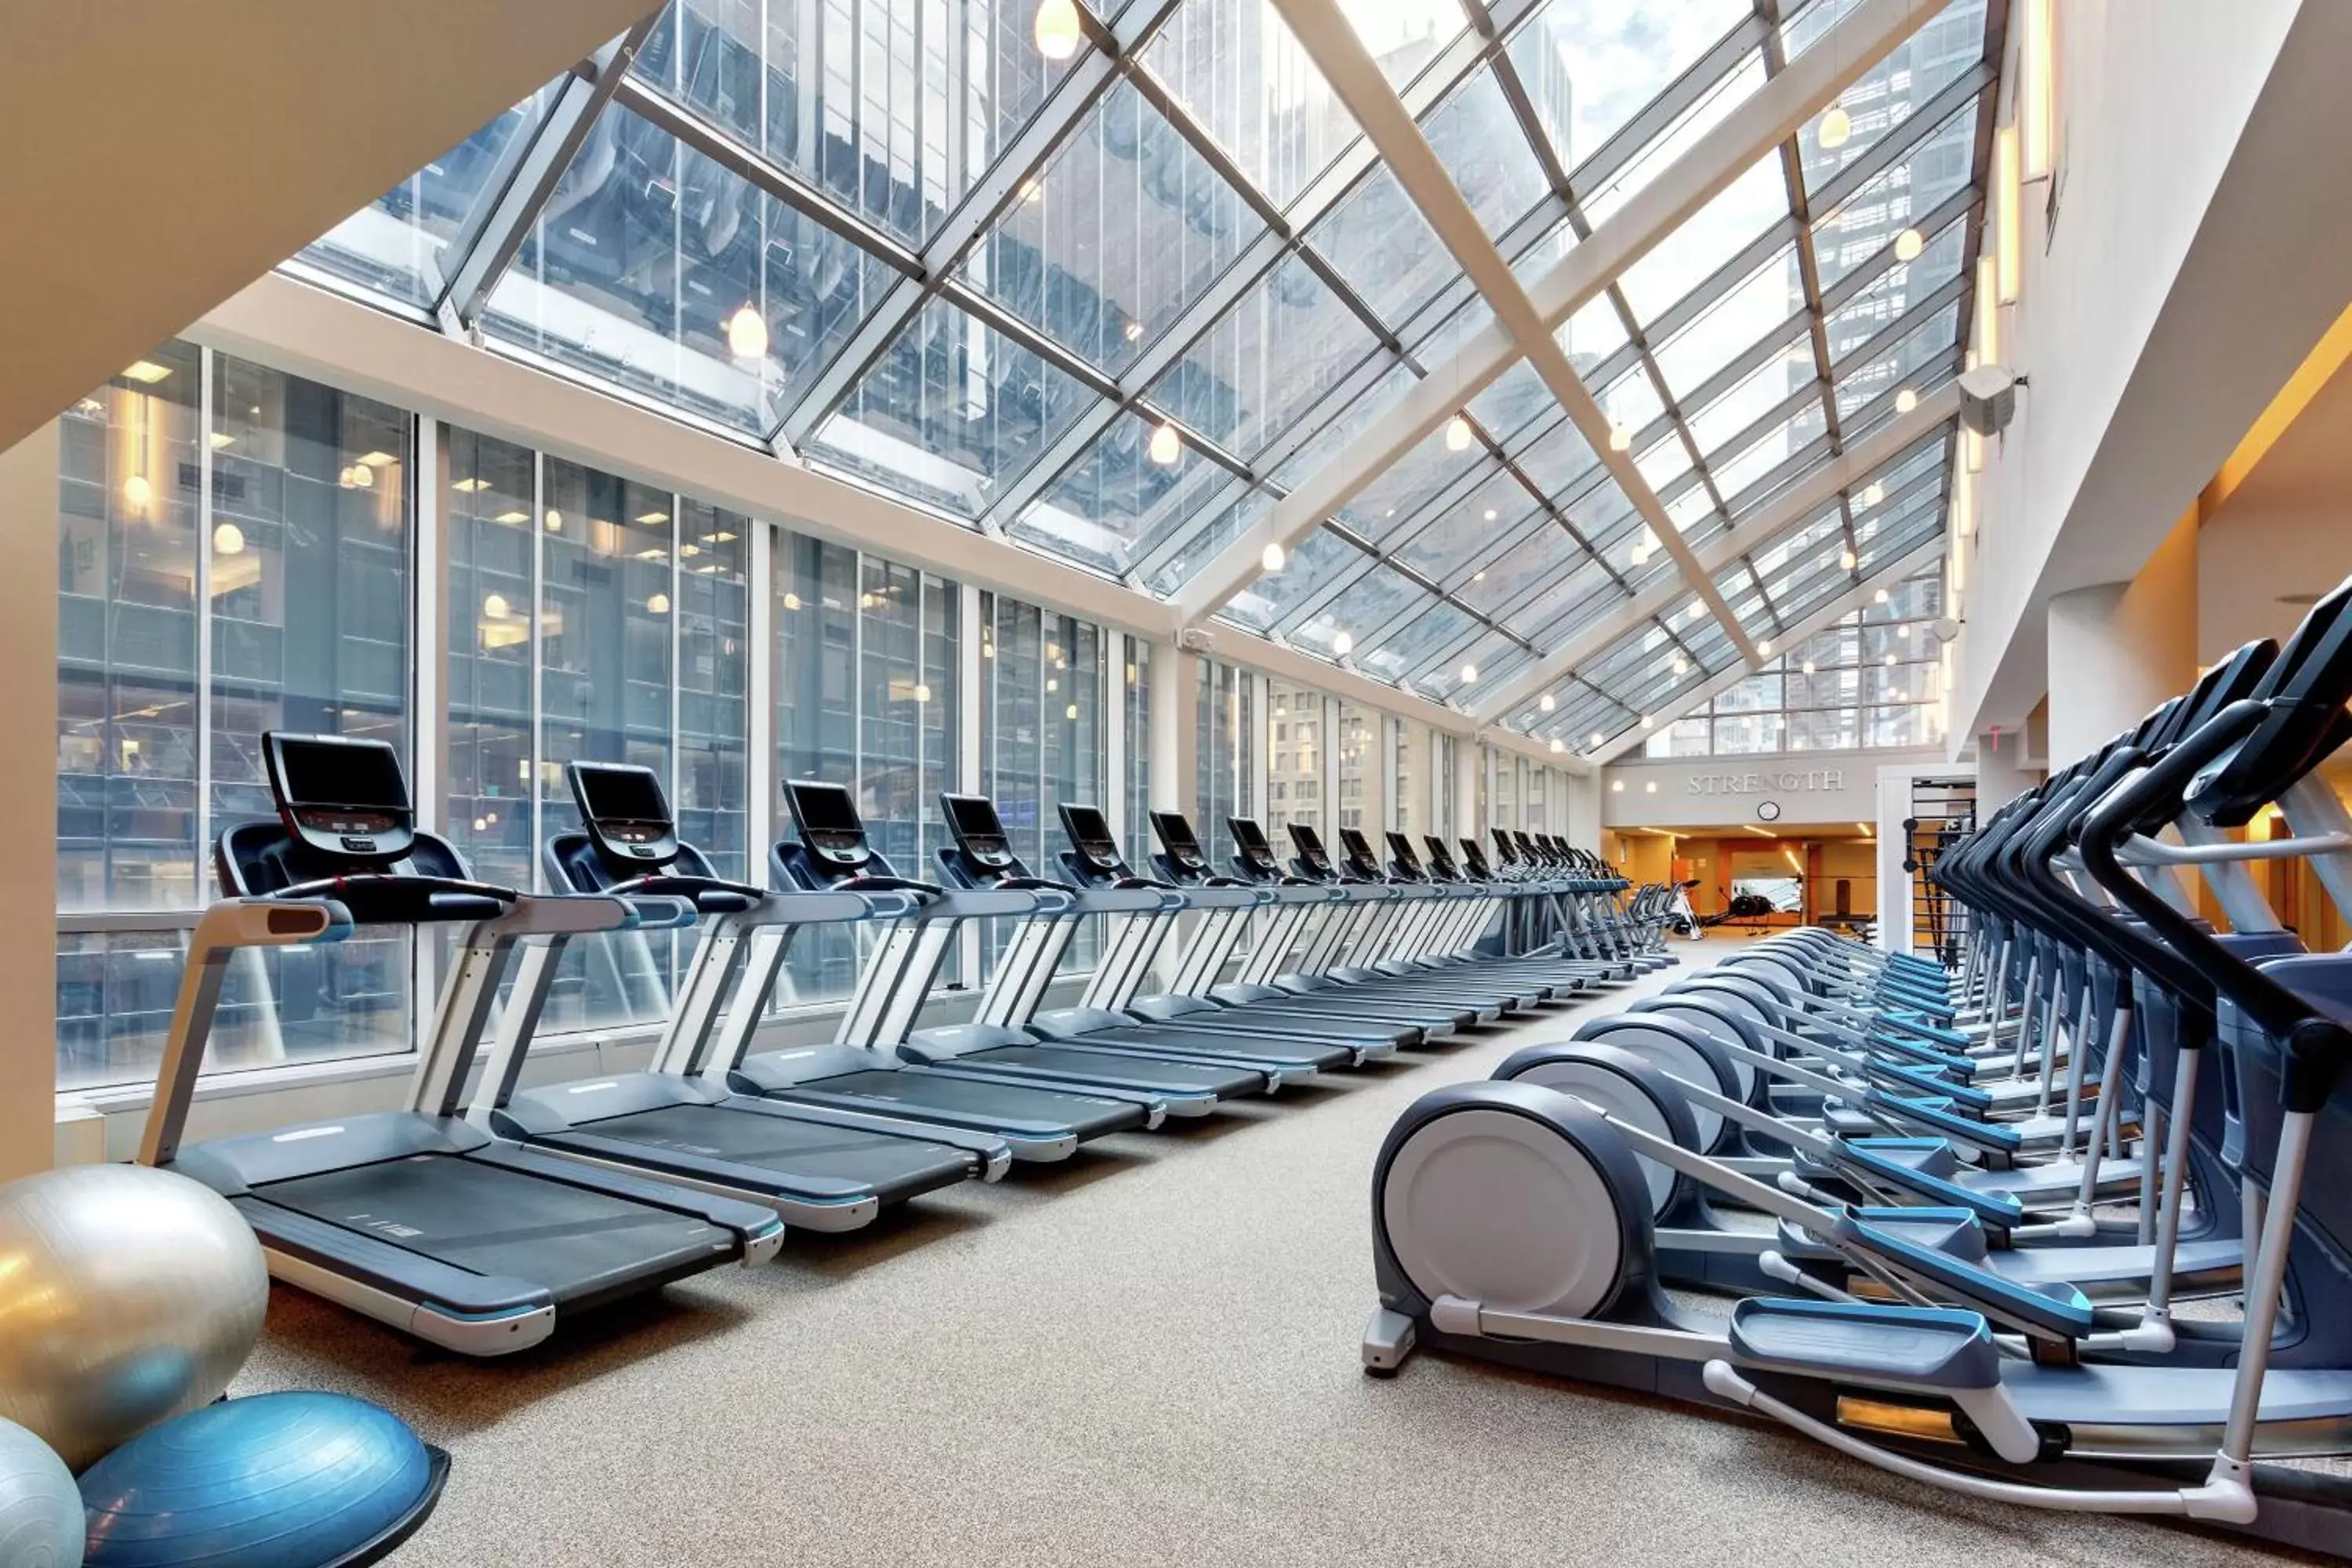 Fitness centre/facilities, Fitness Center/Facilities in New York Hilton Midtown